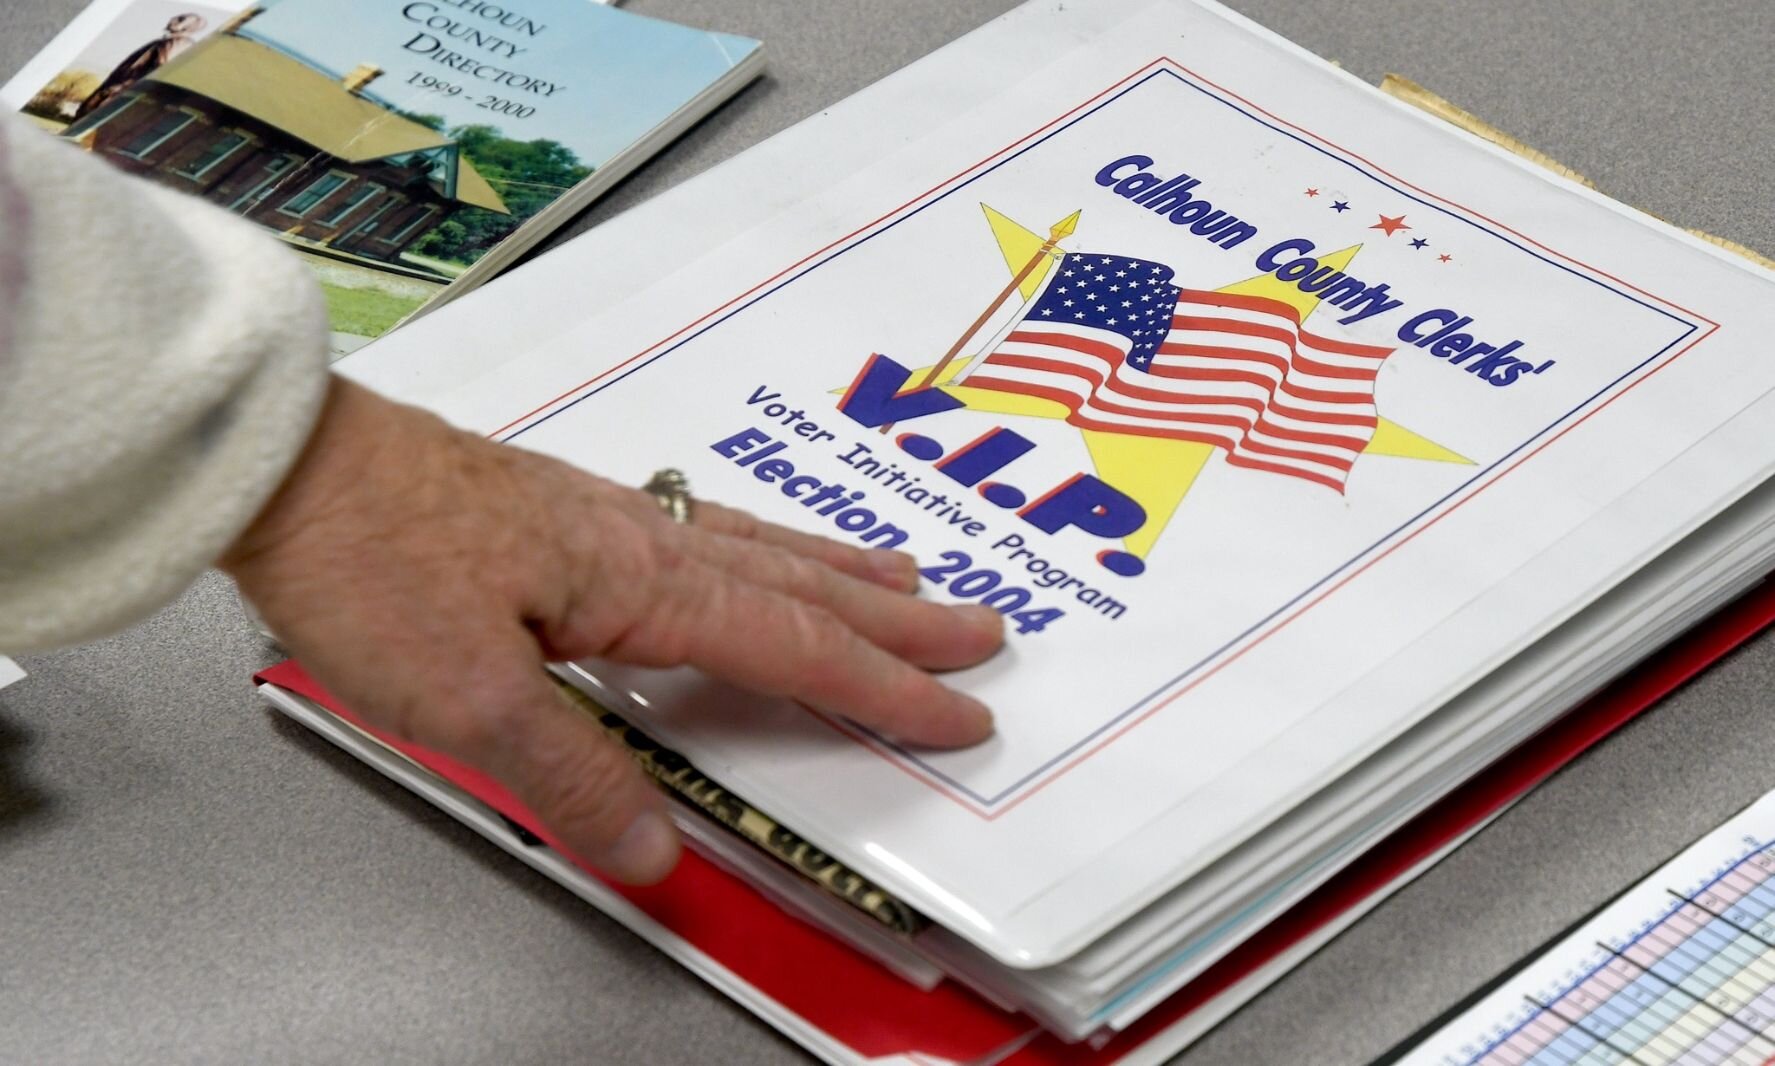 Teri Loew points out a book prepared for the 2004 Voter Initiative Program.